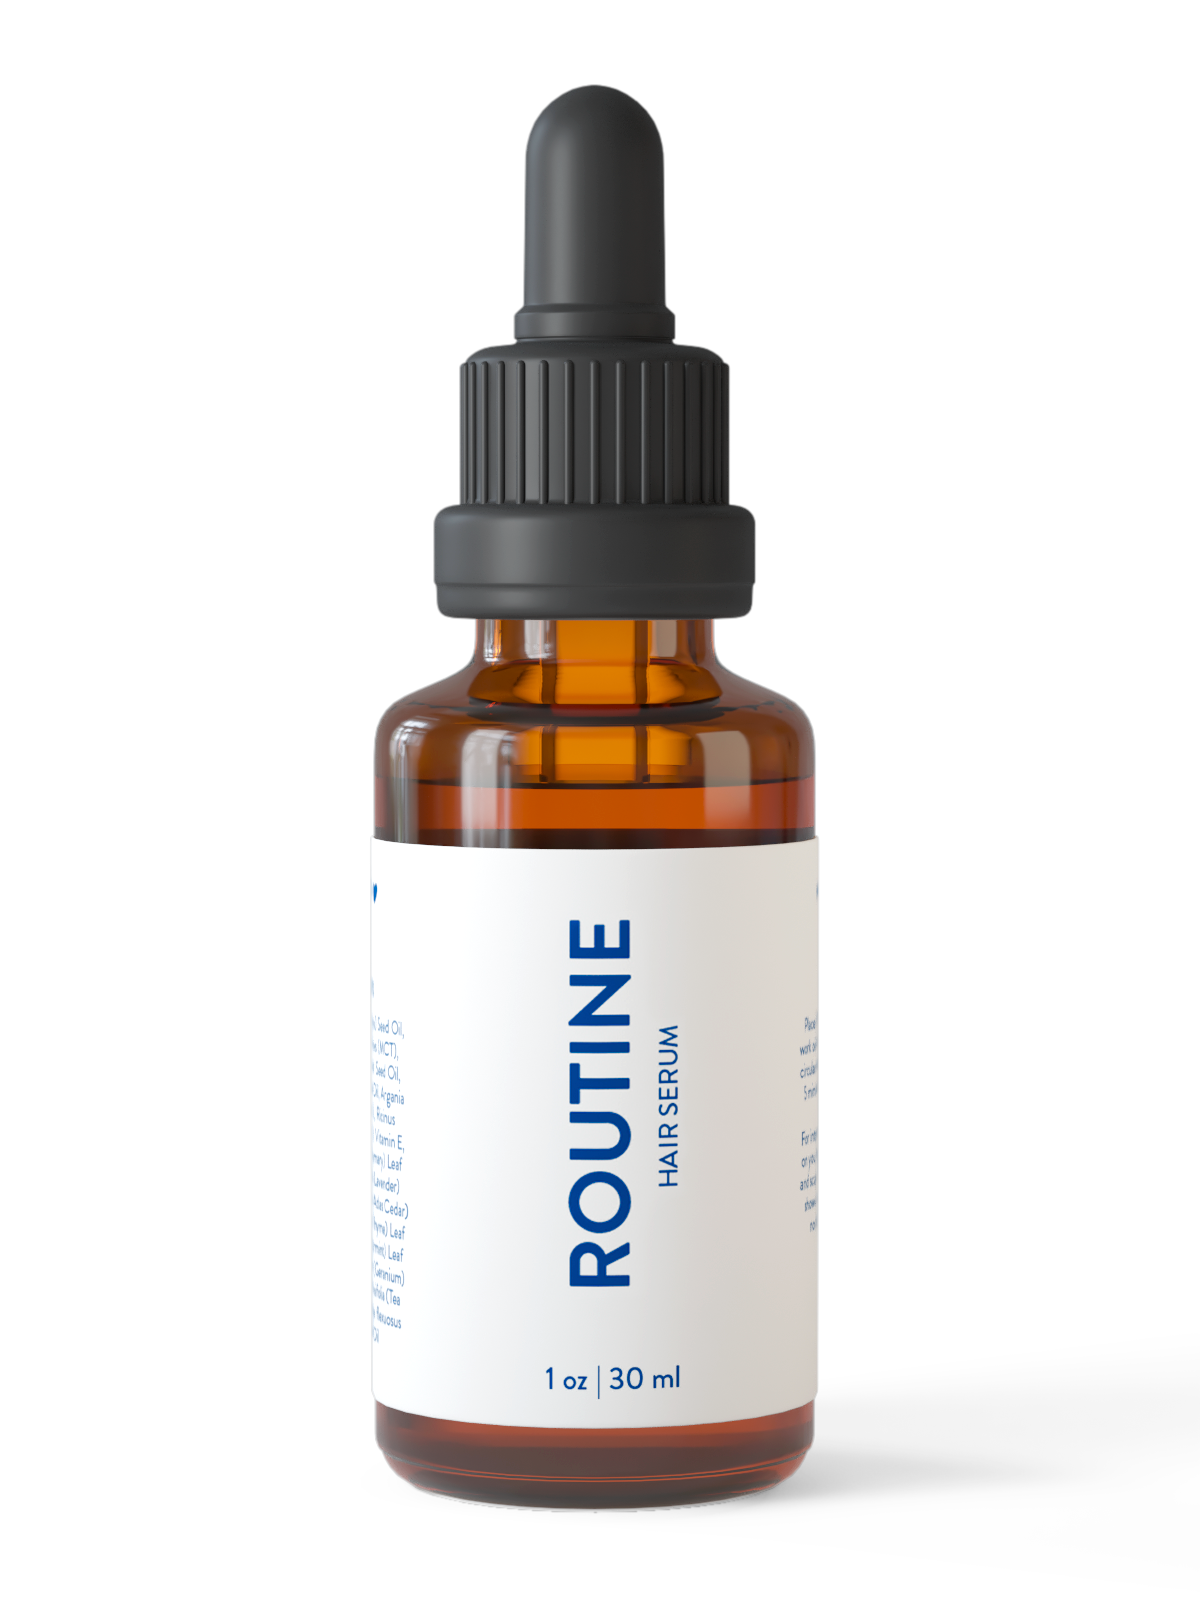 Our advanced hair serum is formulated to revitalize roots, protect strands, and balance your scalp biome.